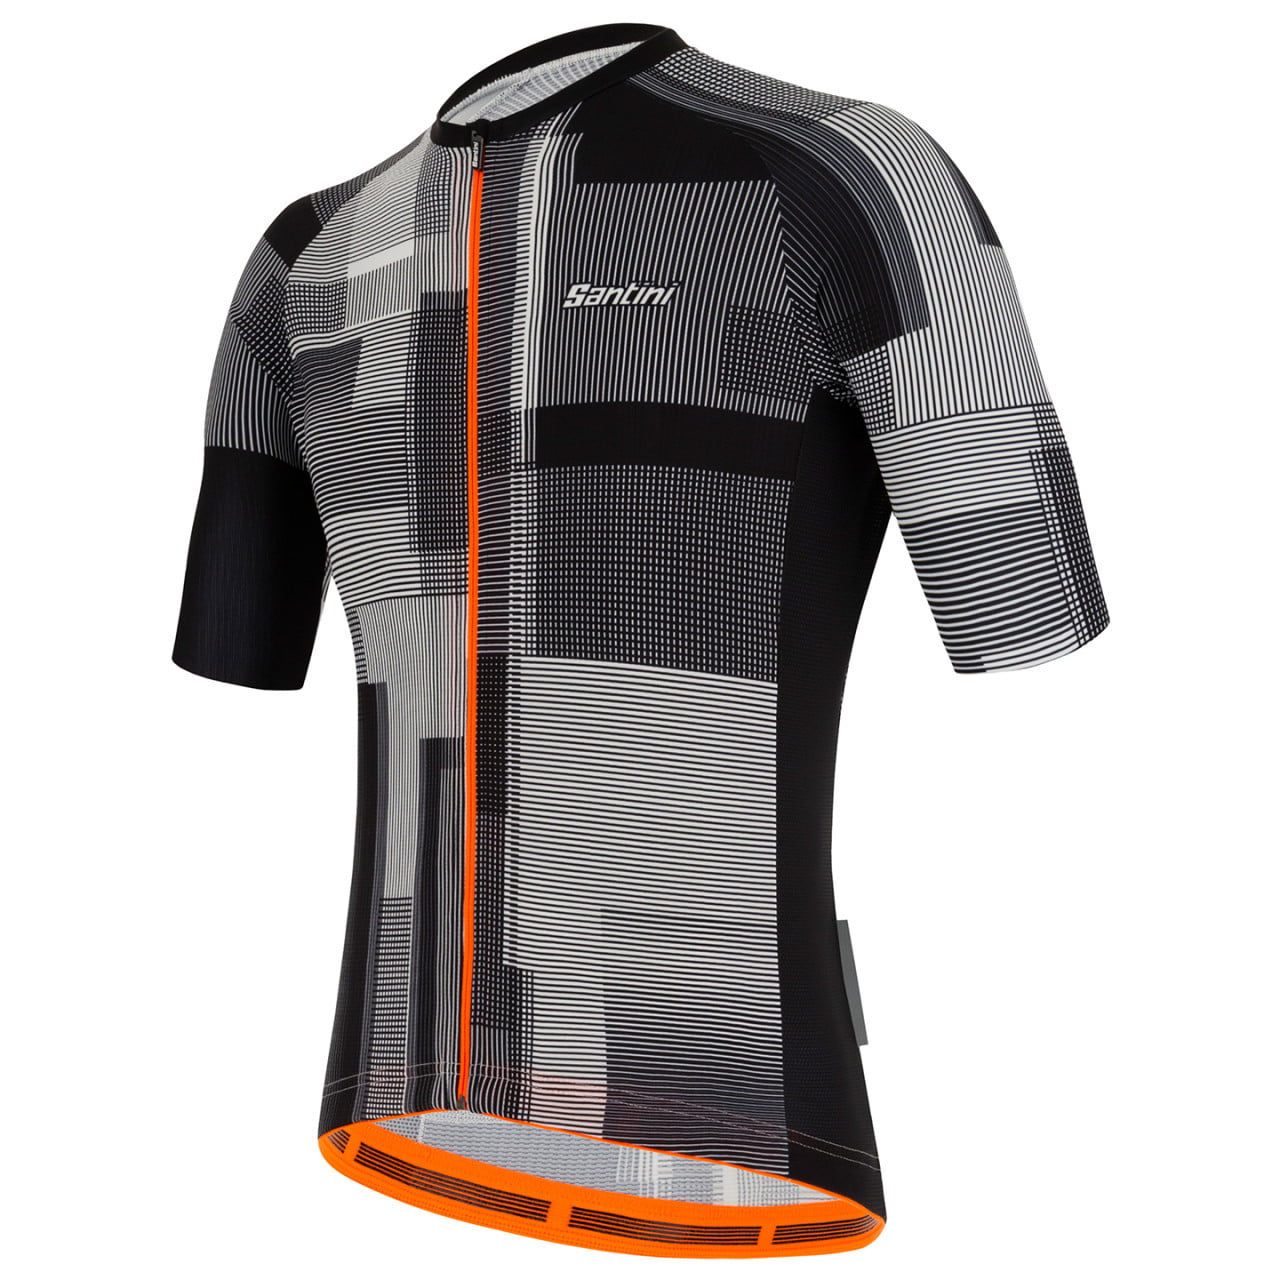 Maillot manches courtes Karma Kinetic